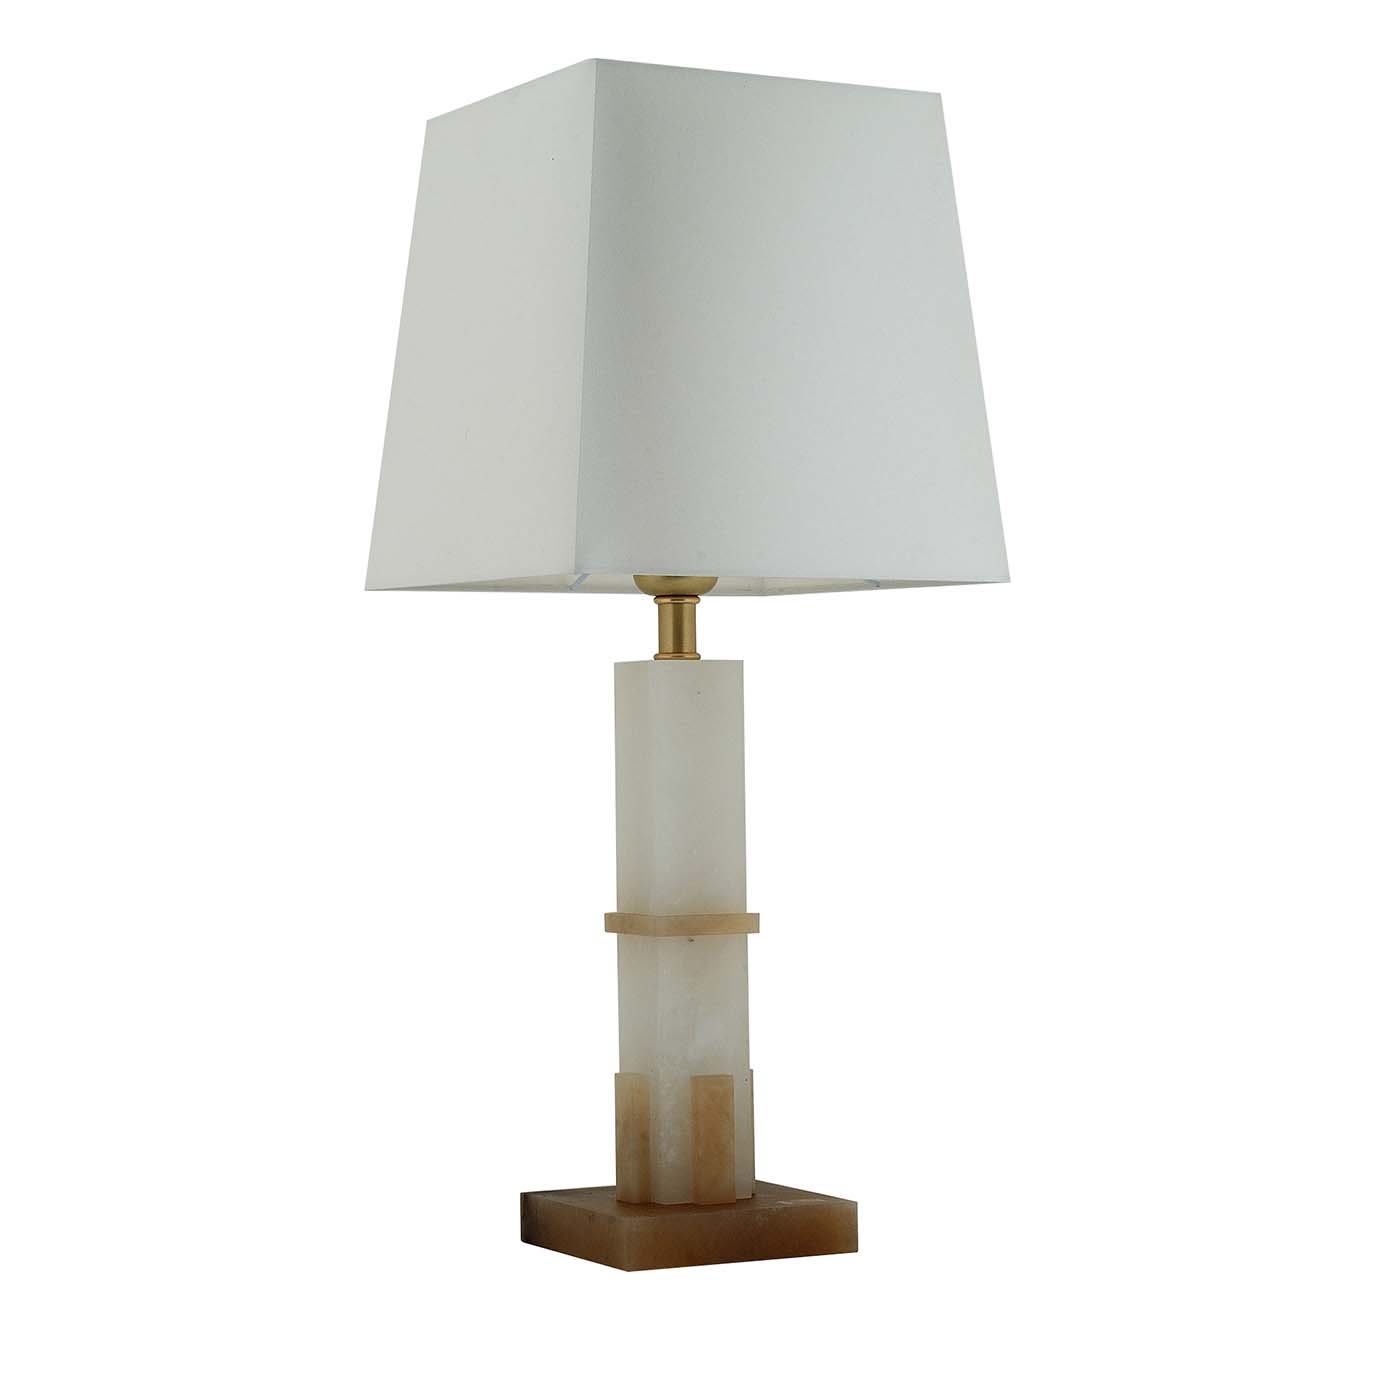 Lanny Table Lamp - CosmoTre